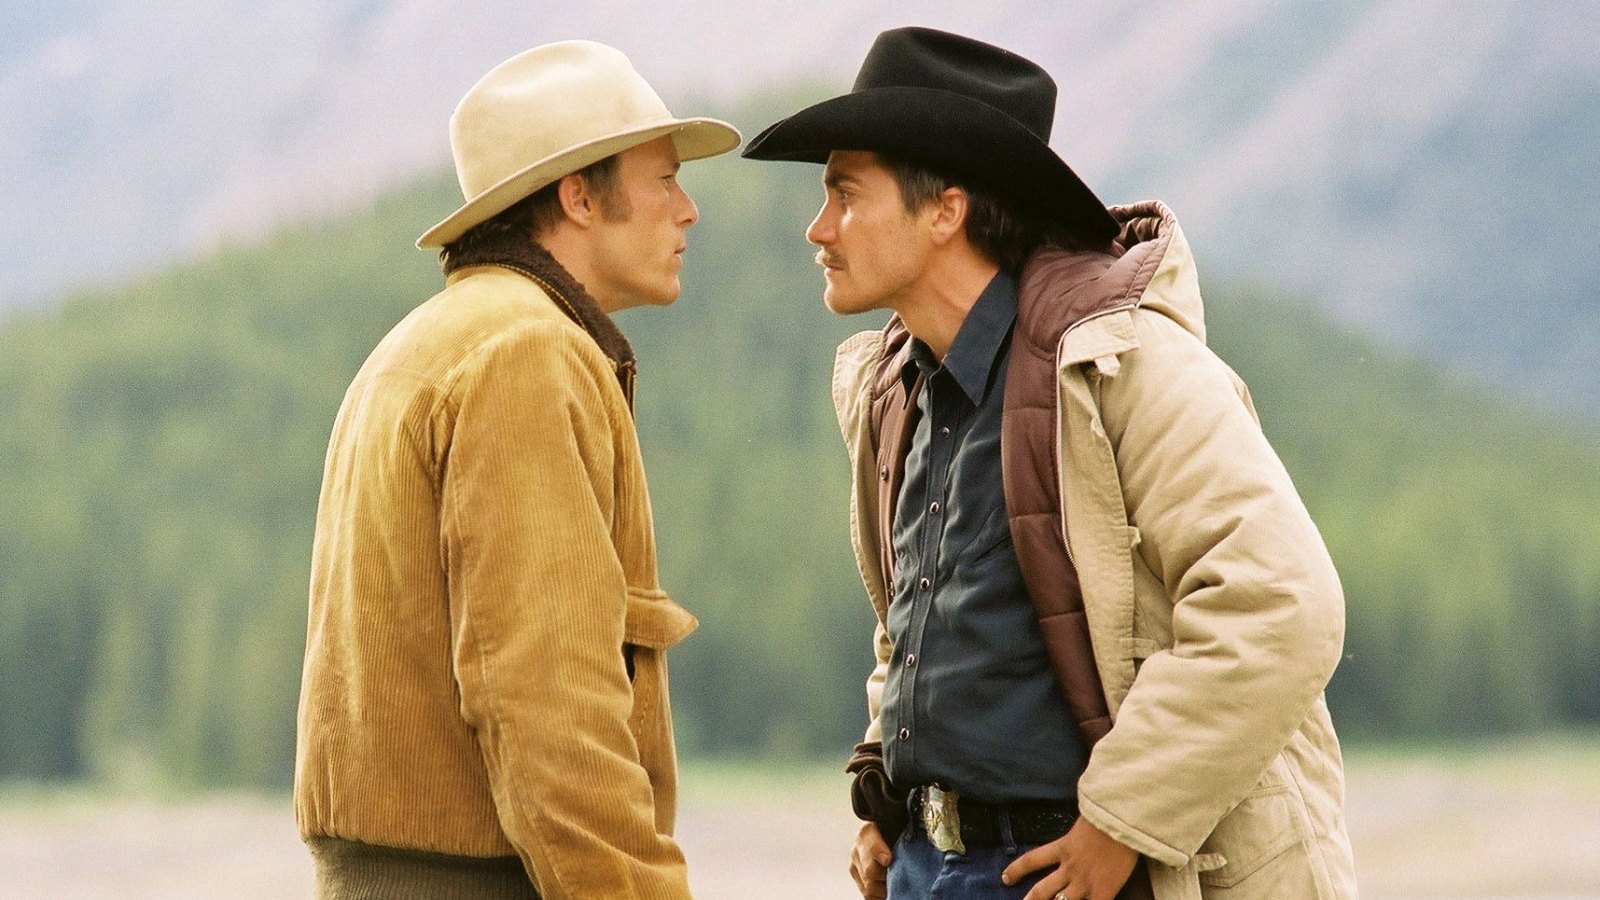 'Brokeback Mountain' Director Claims Heath Ledger and Jake Gyllenhaal Had ‘Friction’ on Set: There Was a 'Clash of Styles'